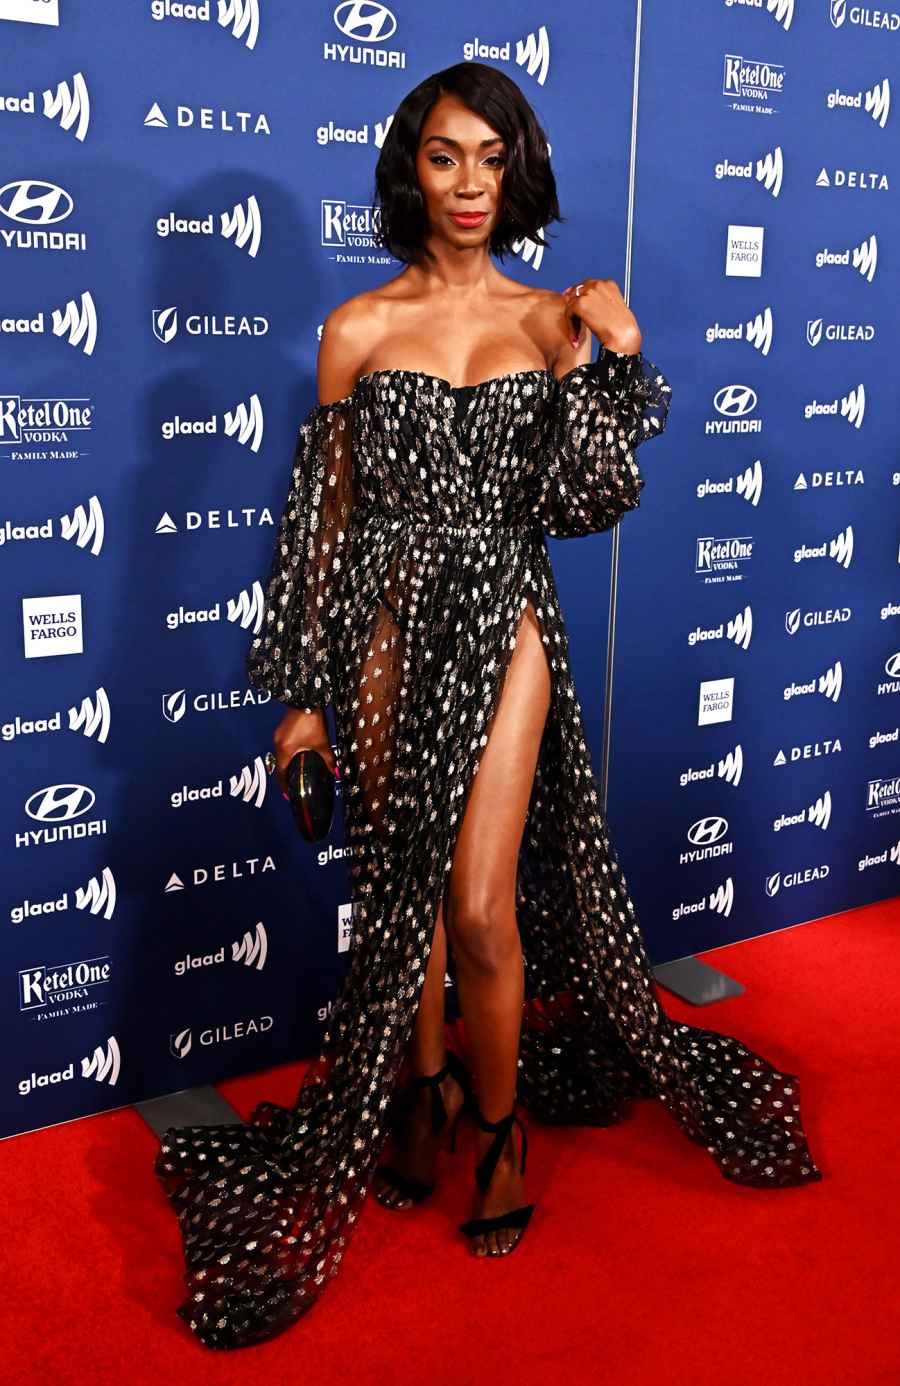 See the Stars at the GLAAD Awards Angelica Ross